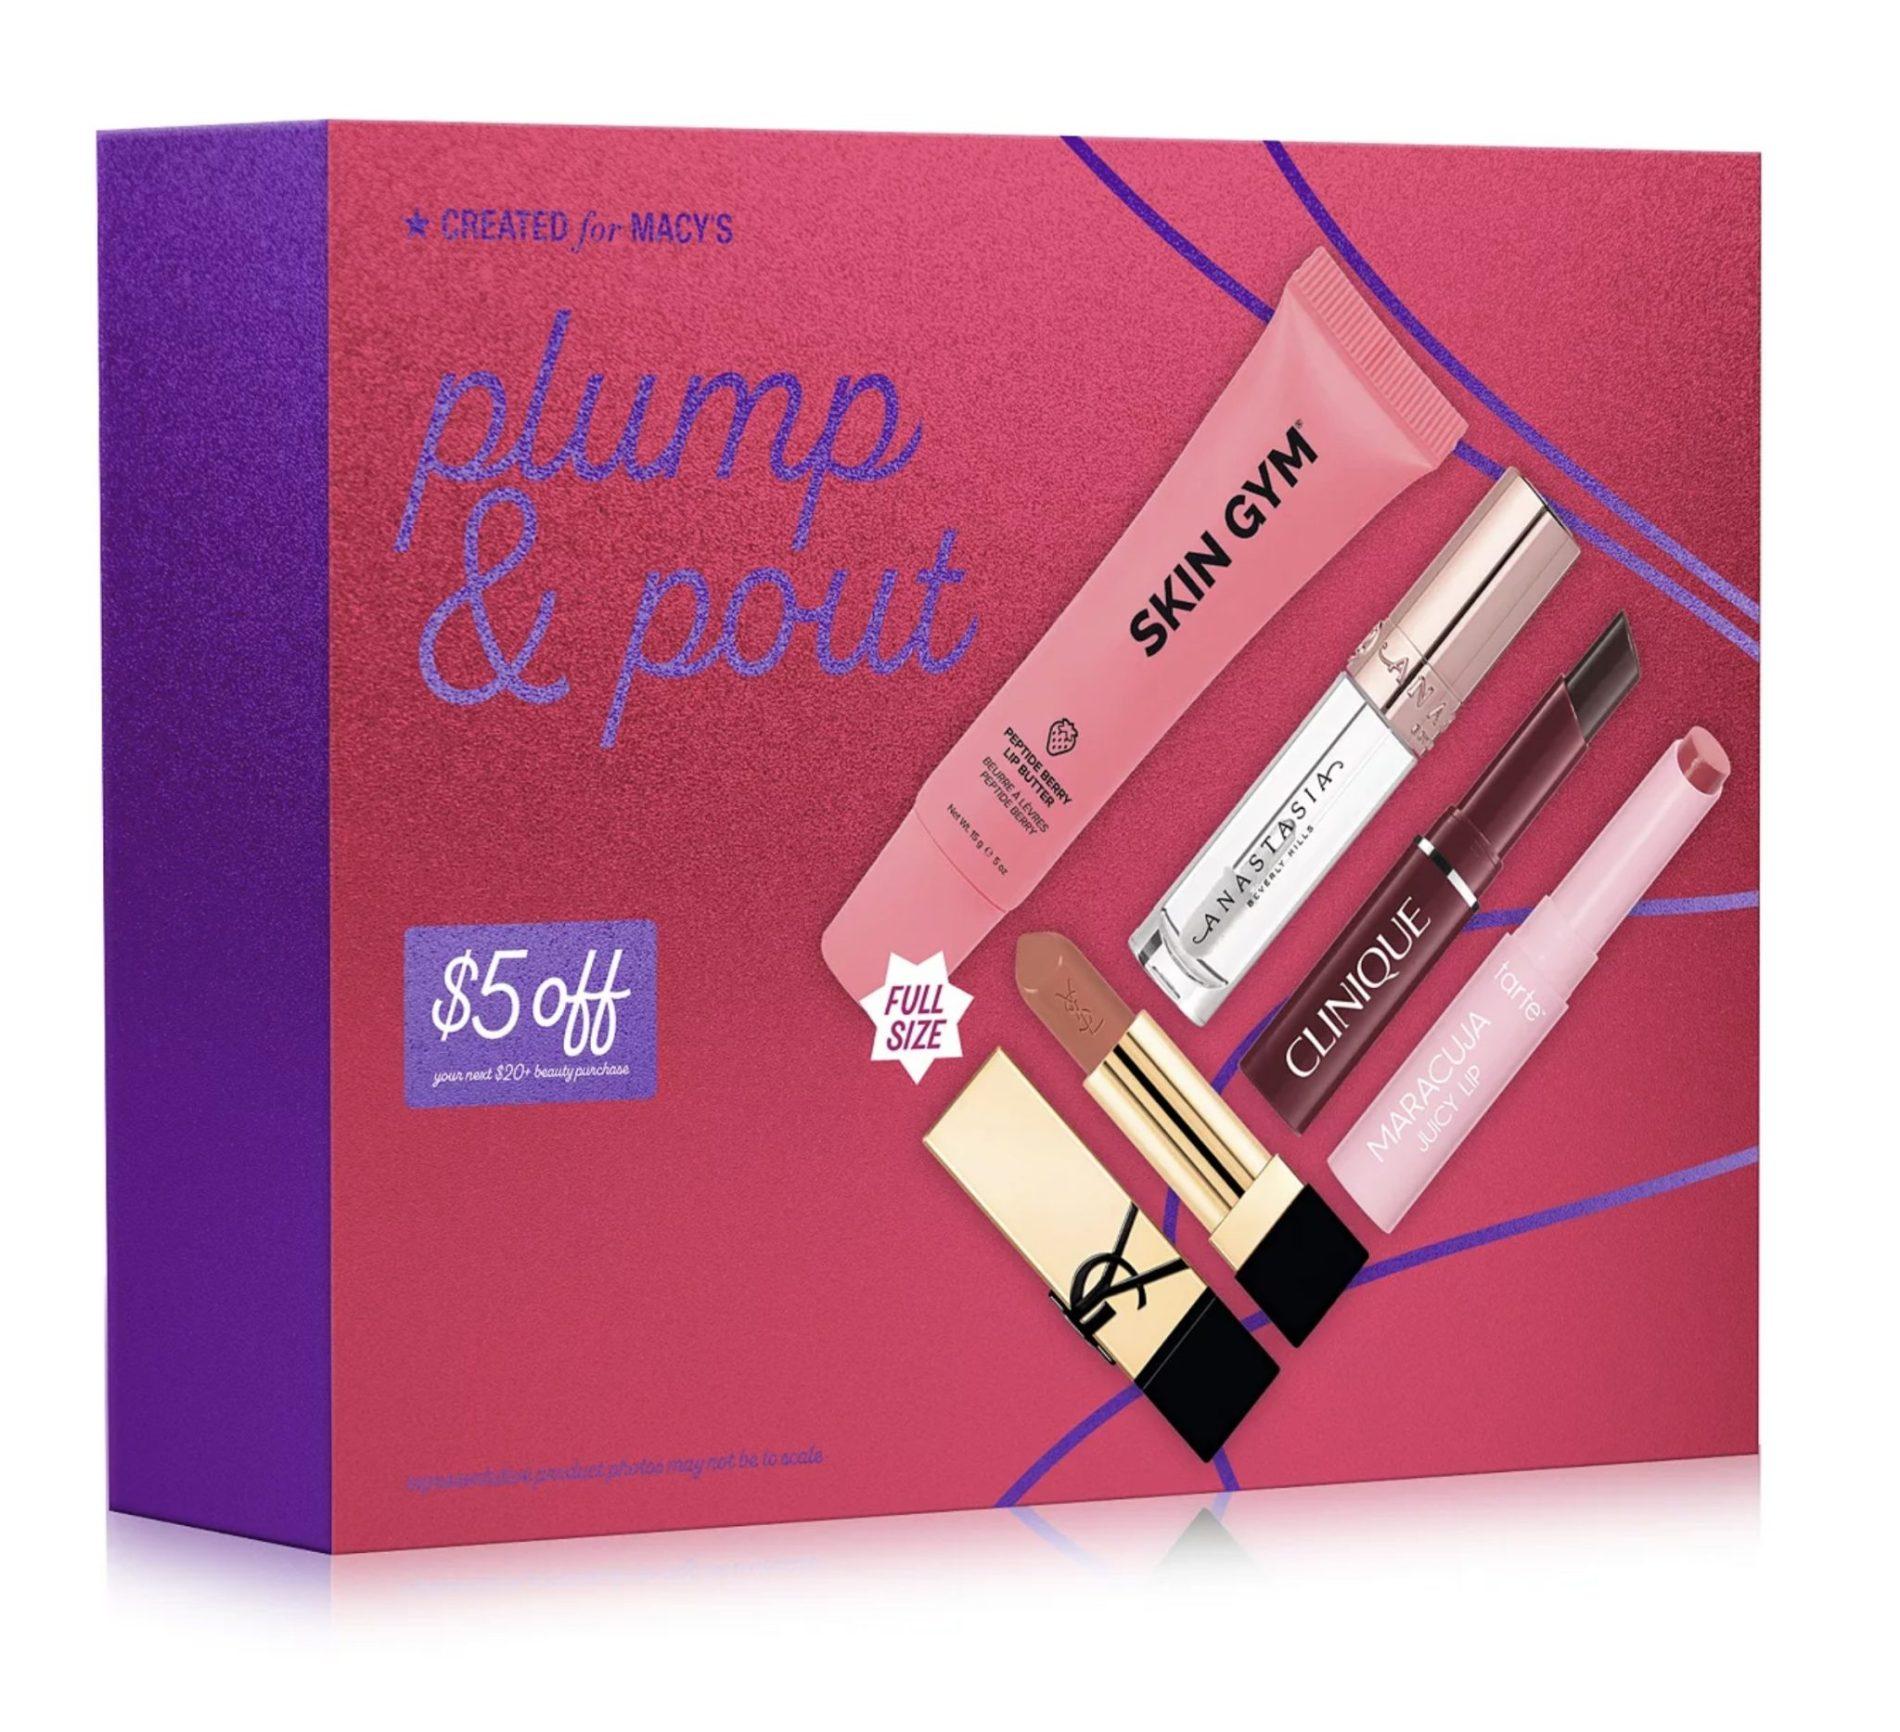 Read more about the article Created for Macy’s Plump & Pout Set